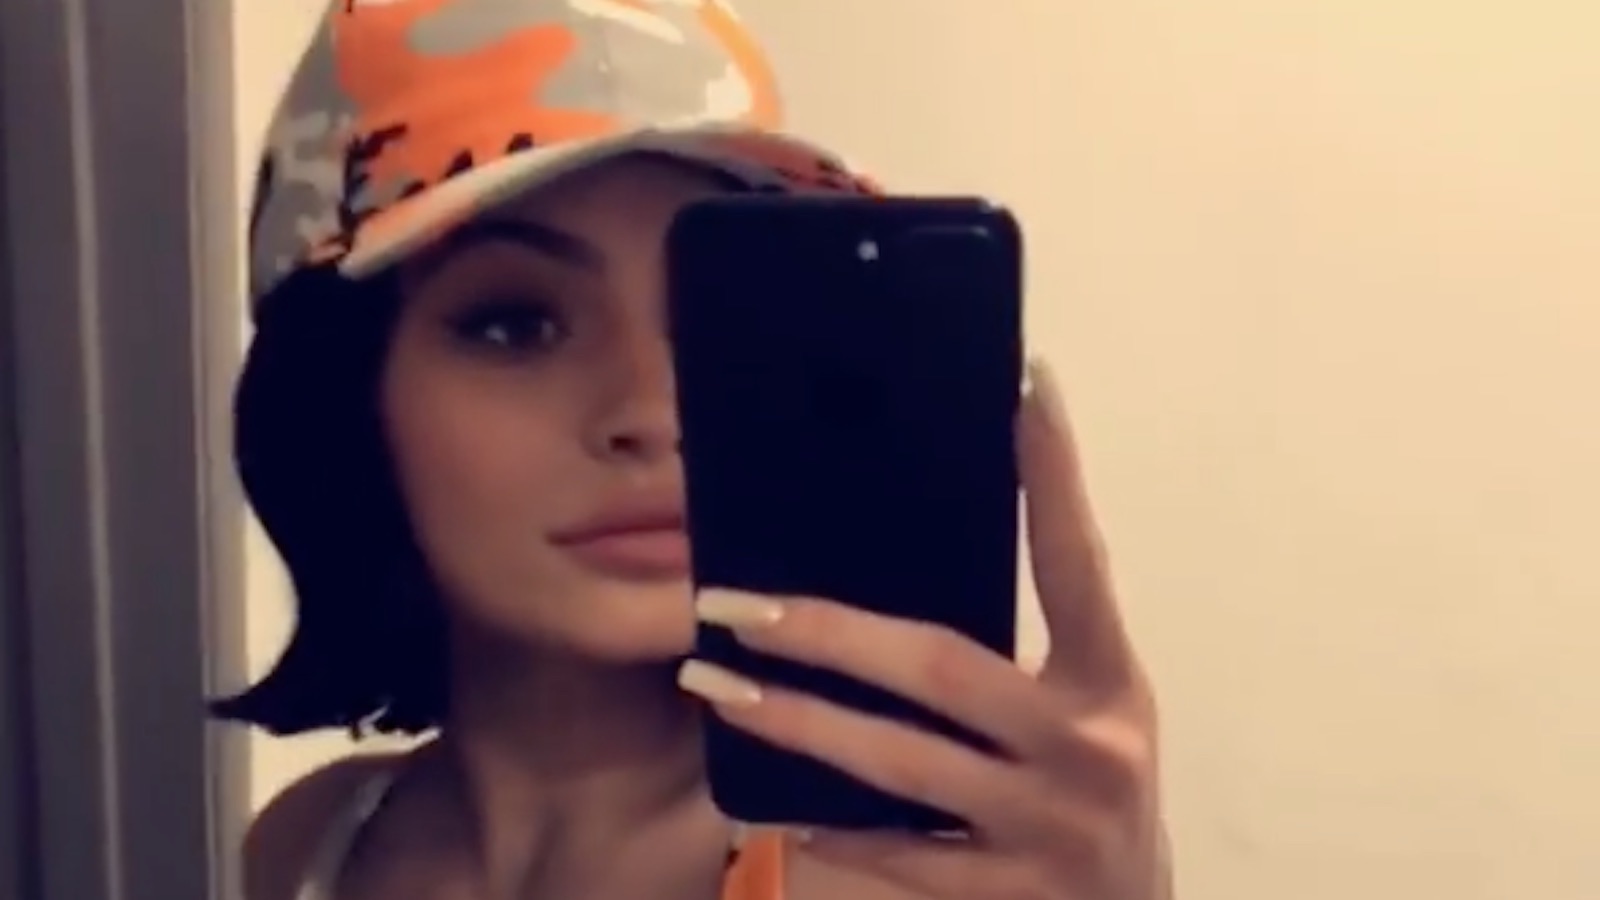 kylie jenner wedgie